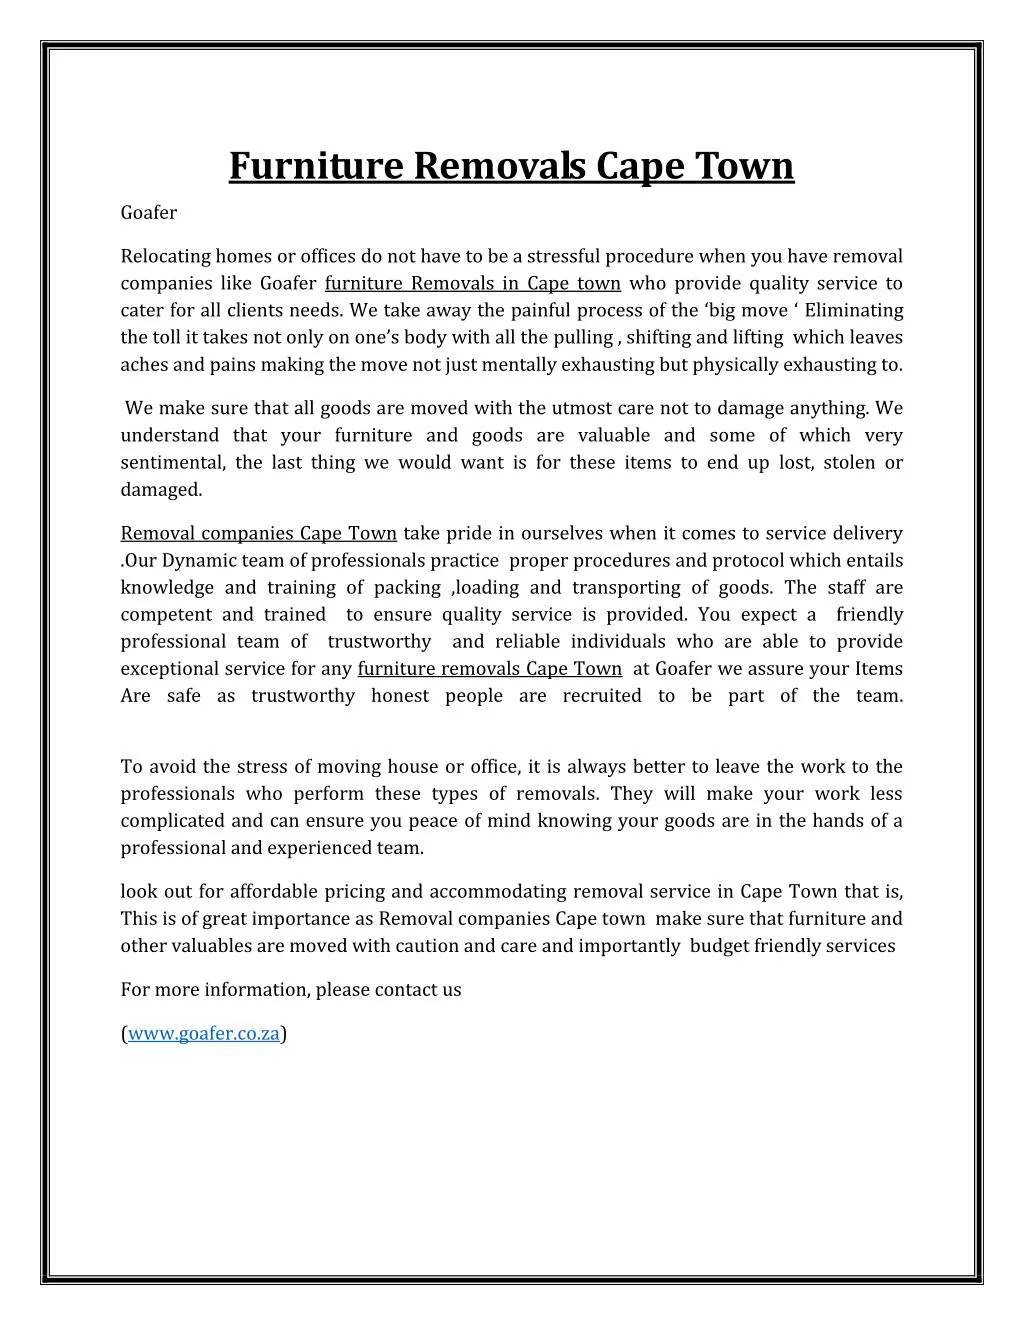 furniture removals cape town